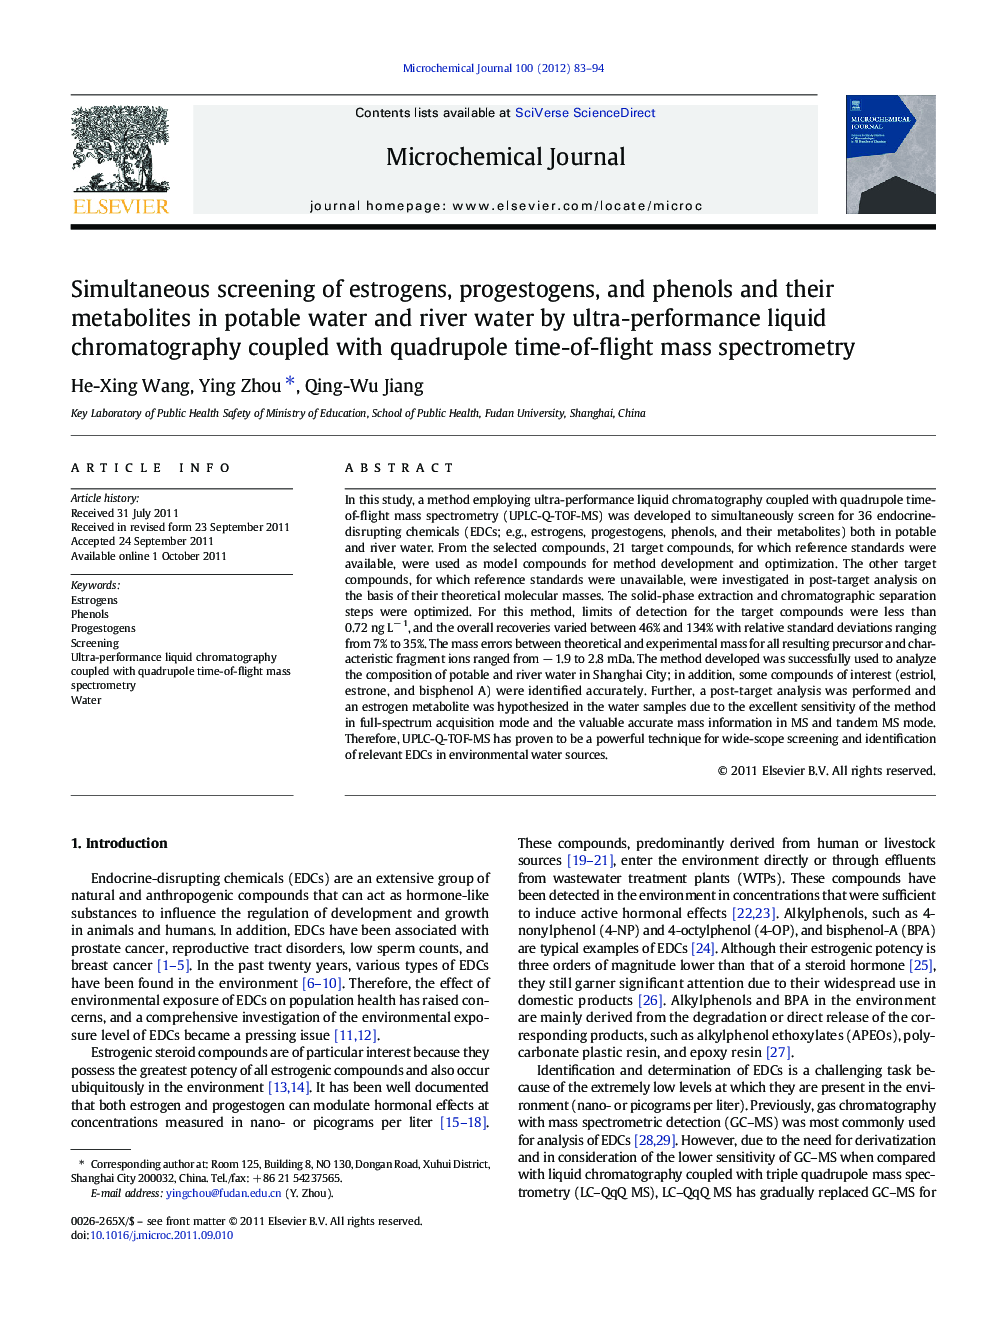 Simultaneous screening of estrogens, progestogens, and phenols and their metabolites in potable water and river water by ultra-performance liquid chromatography coupled with quadrupole time-of-flight mass spectrometry